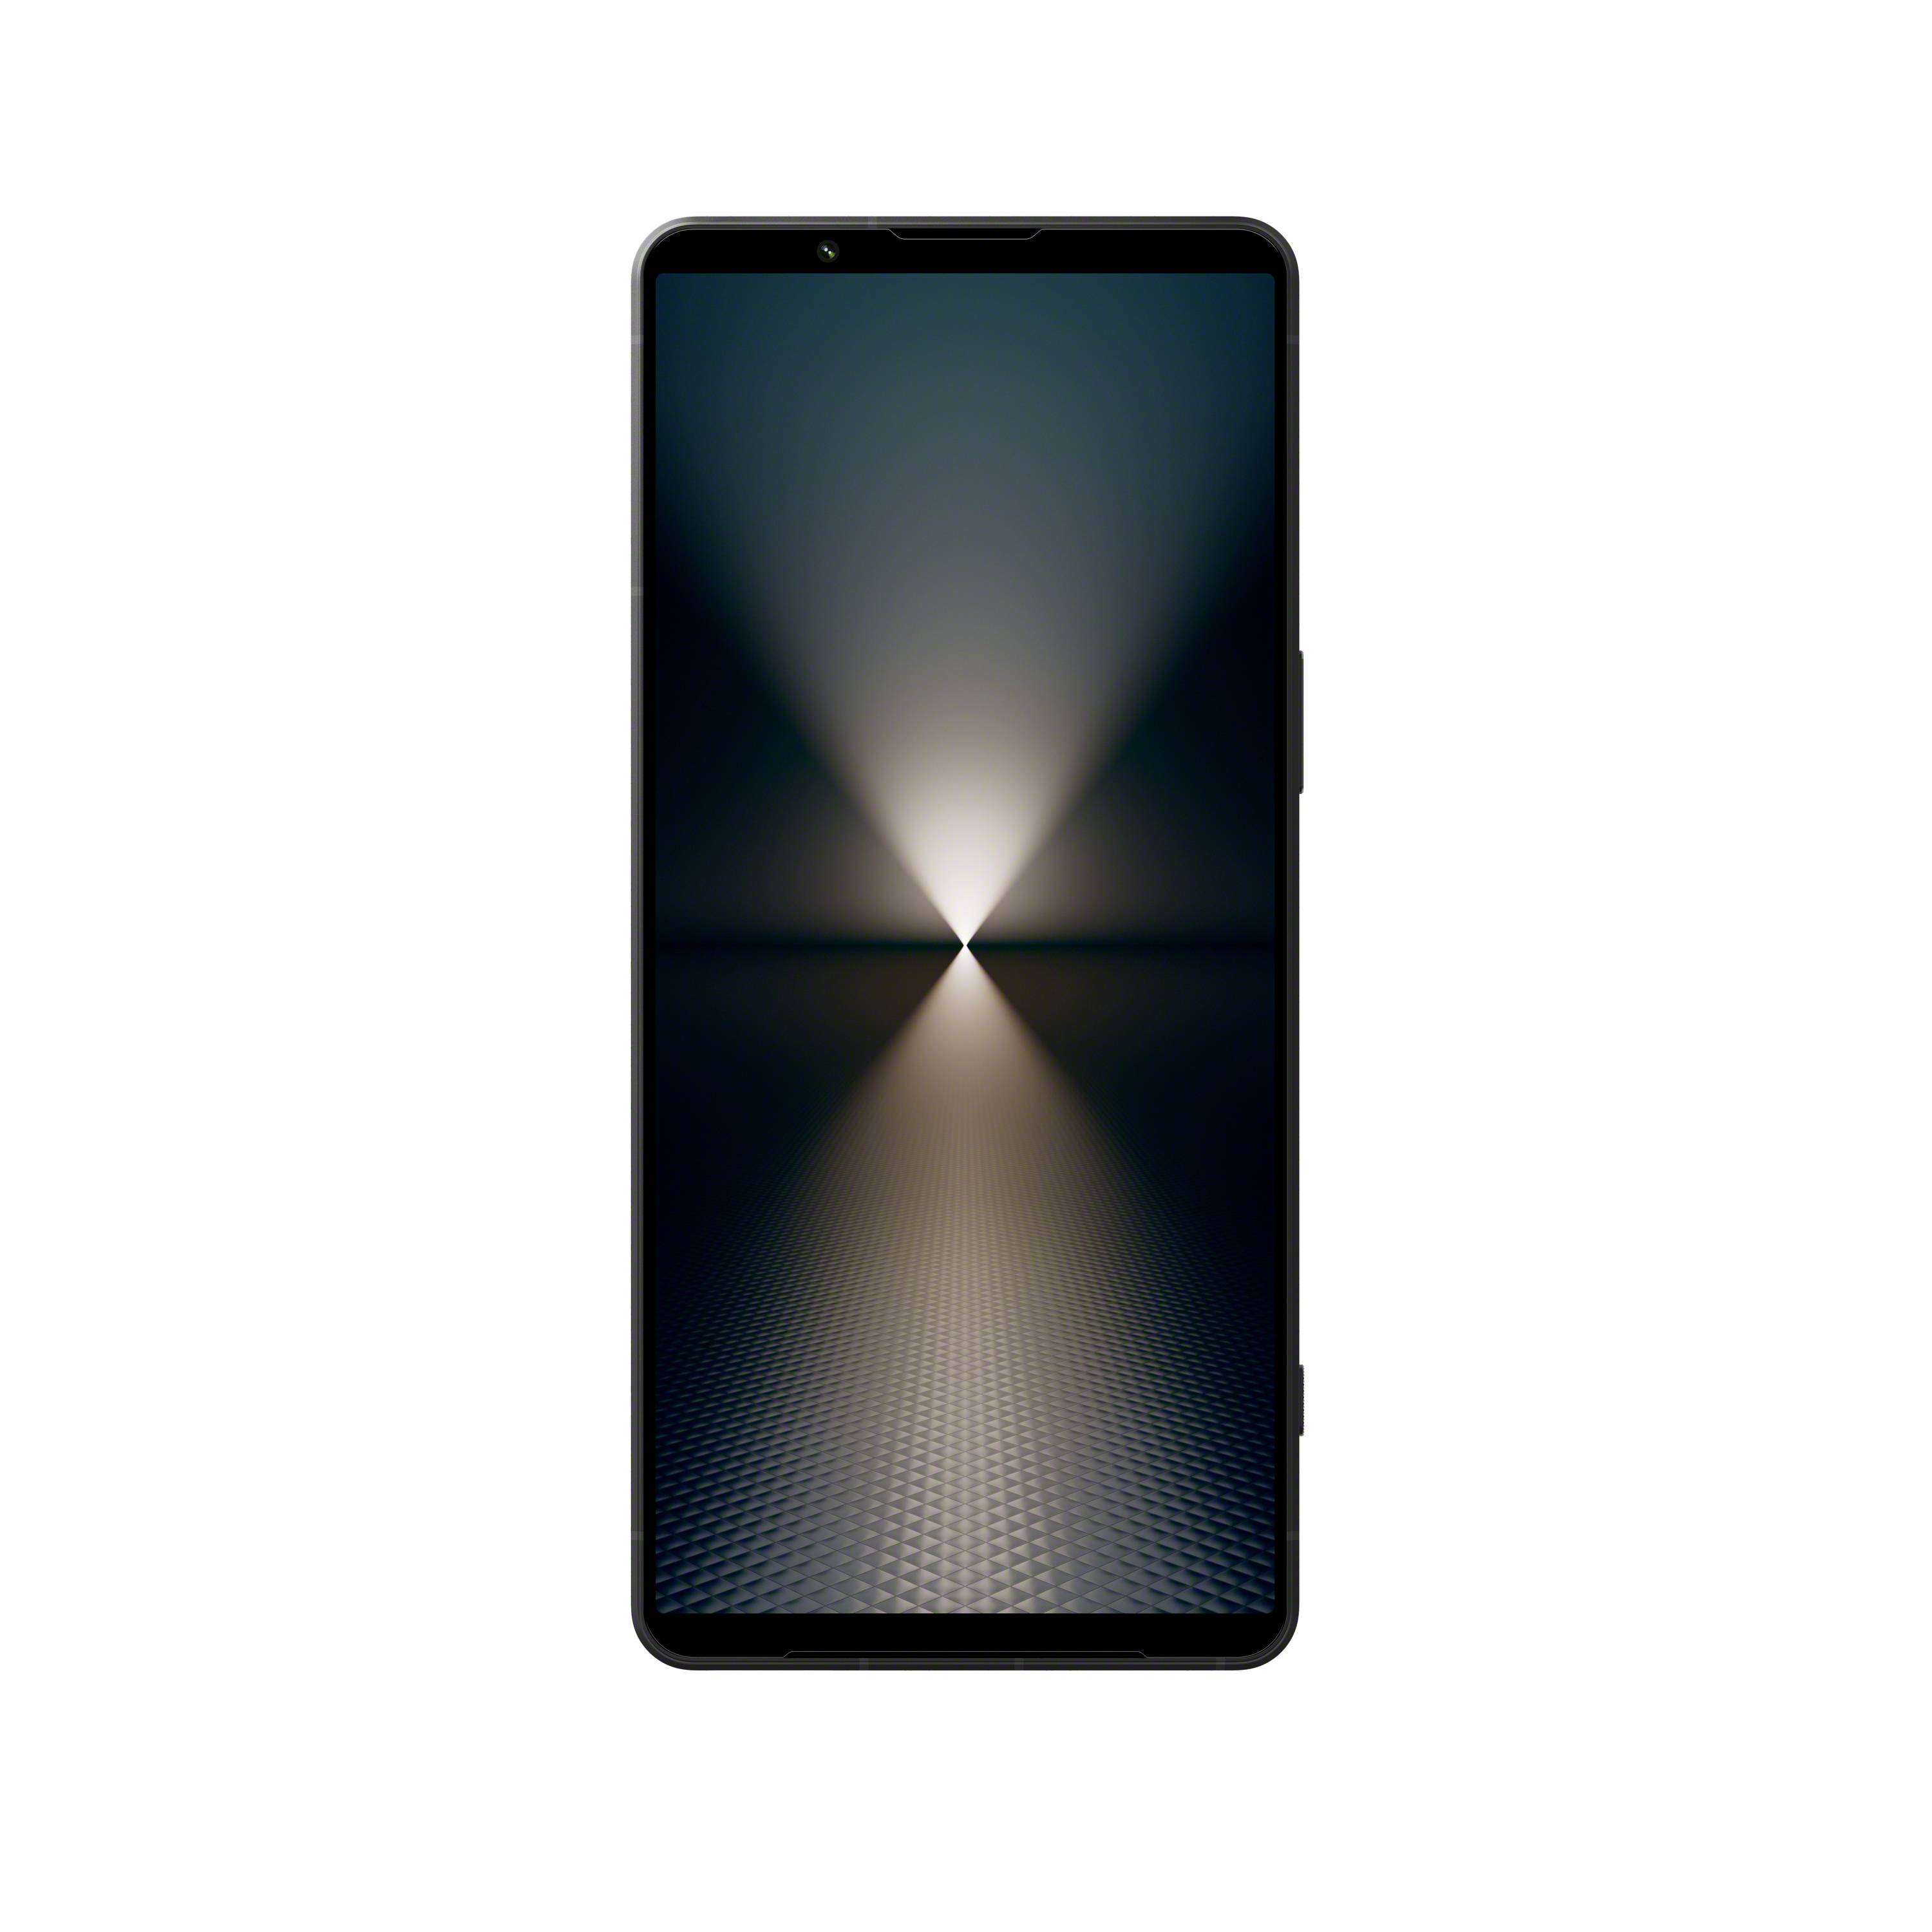 Sony Xperia 1 VI image number 1